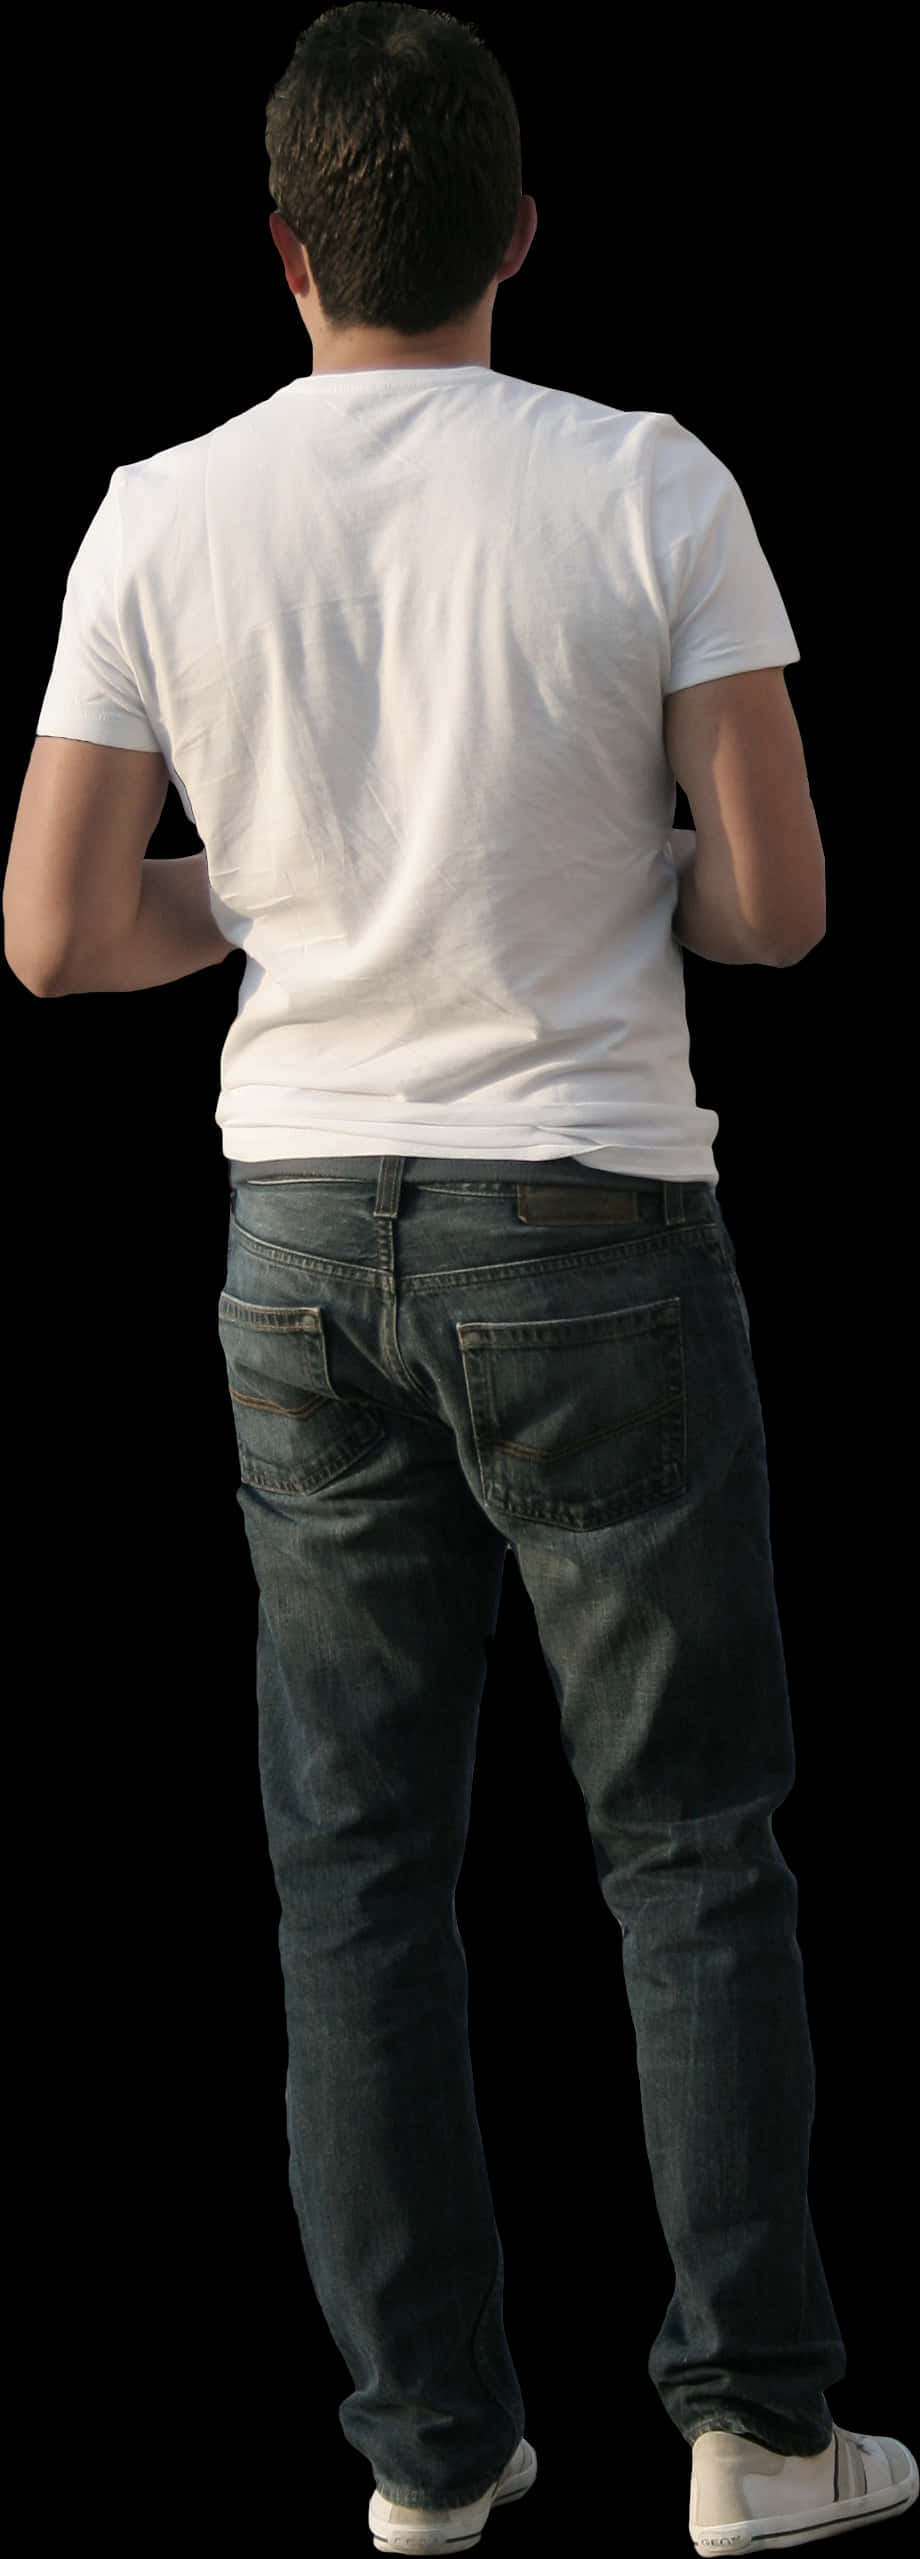 Manin White Shirtand Jeans Back View PNG image